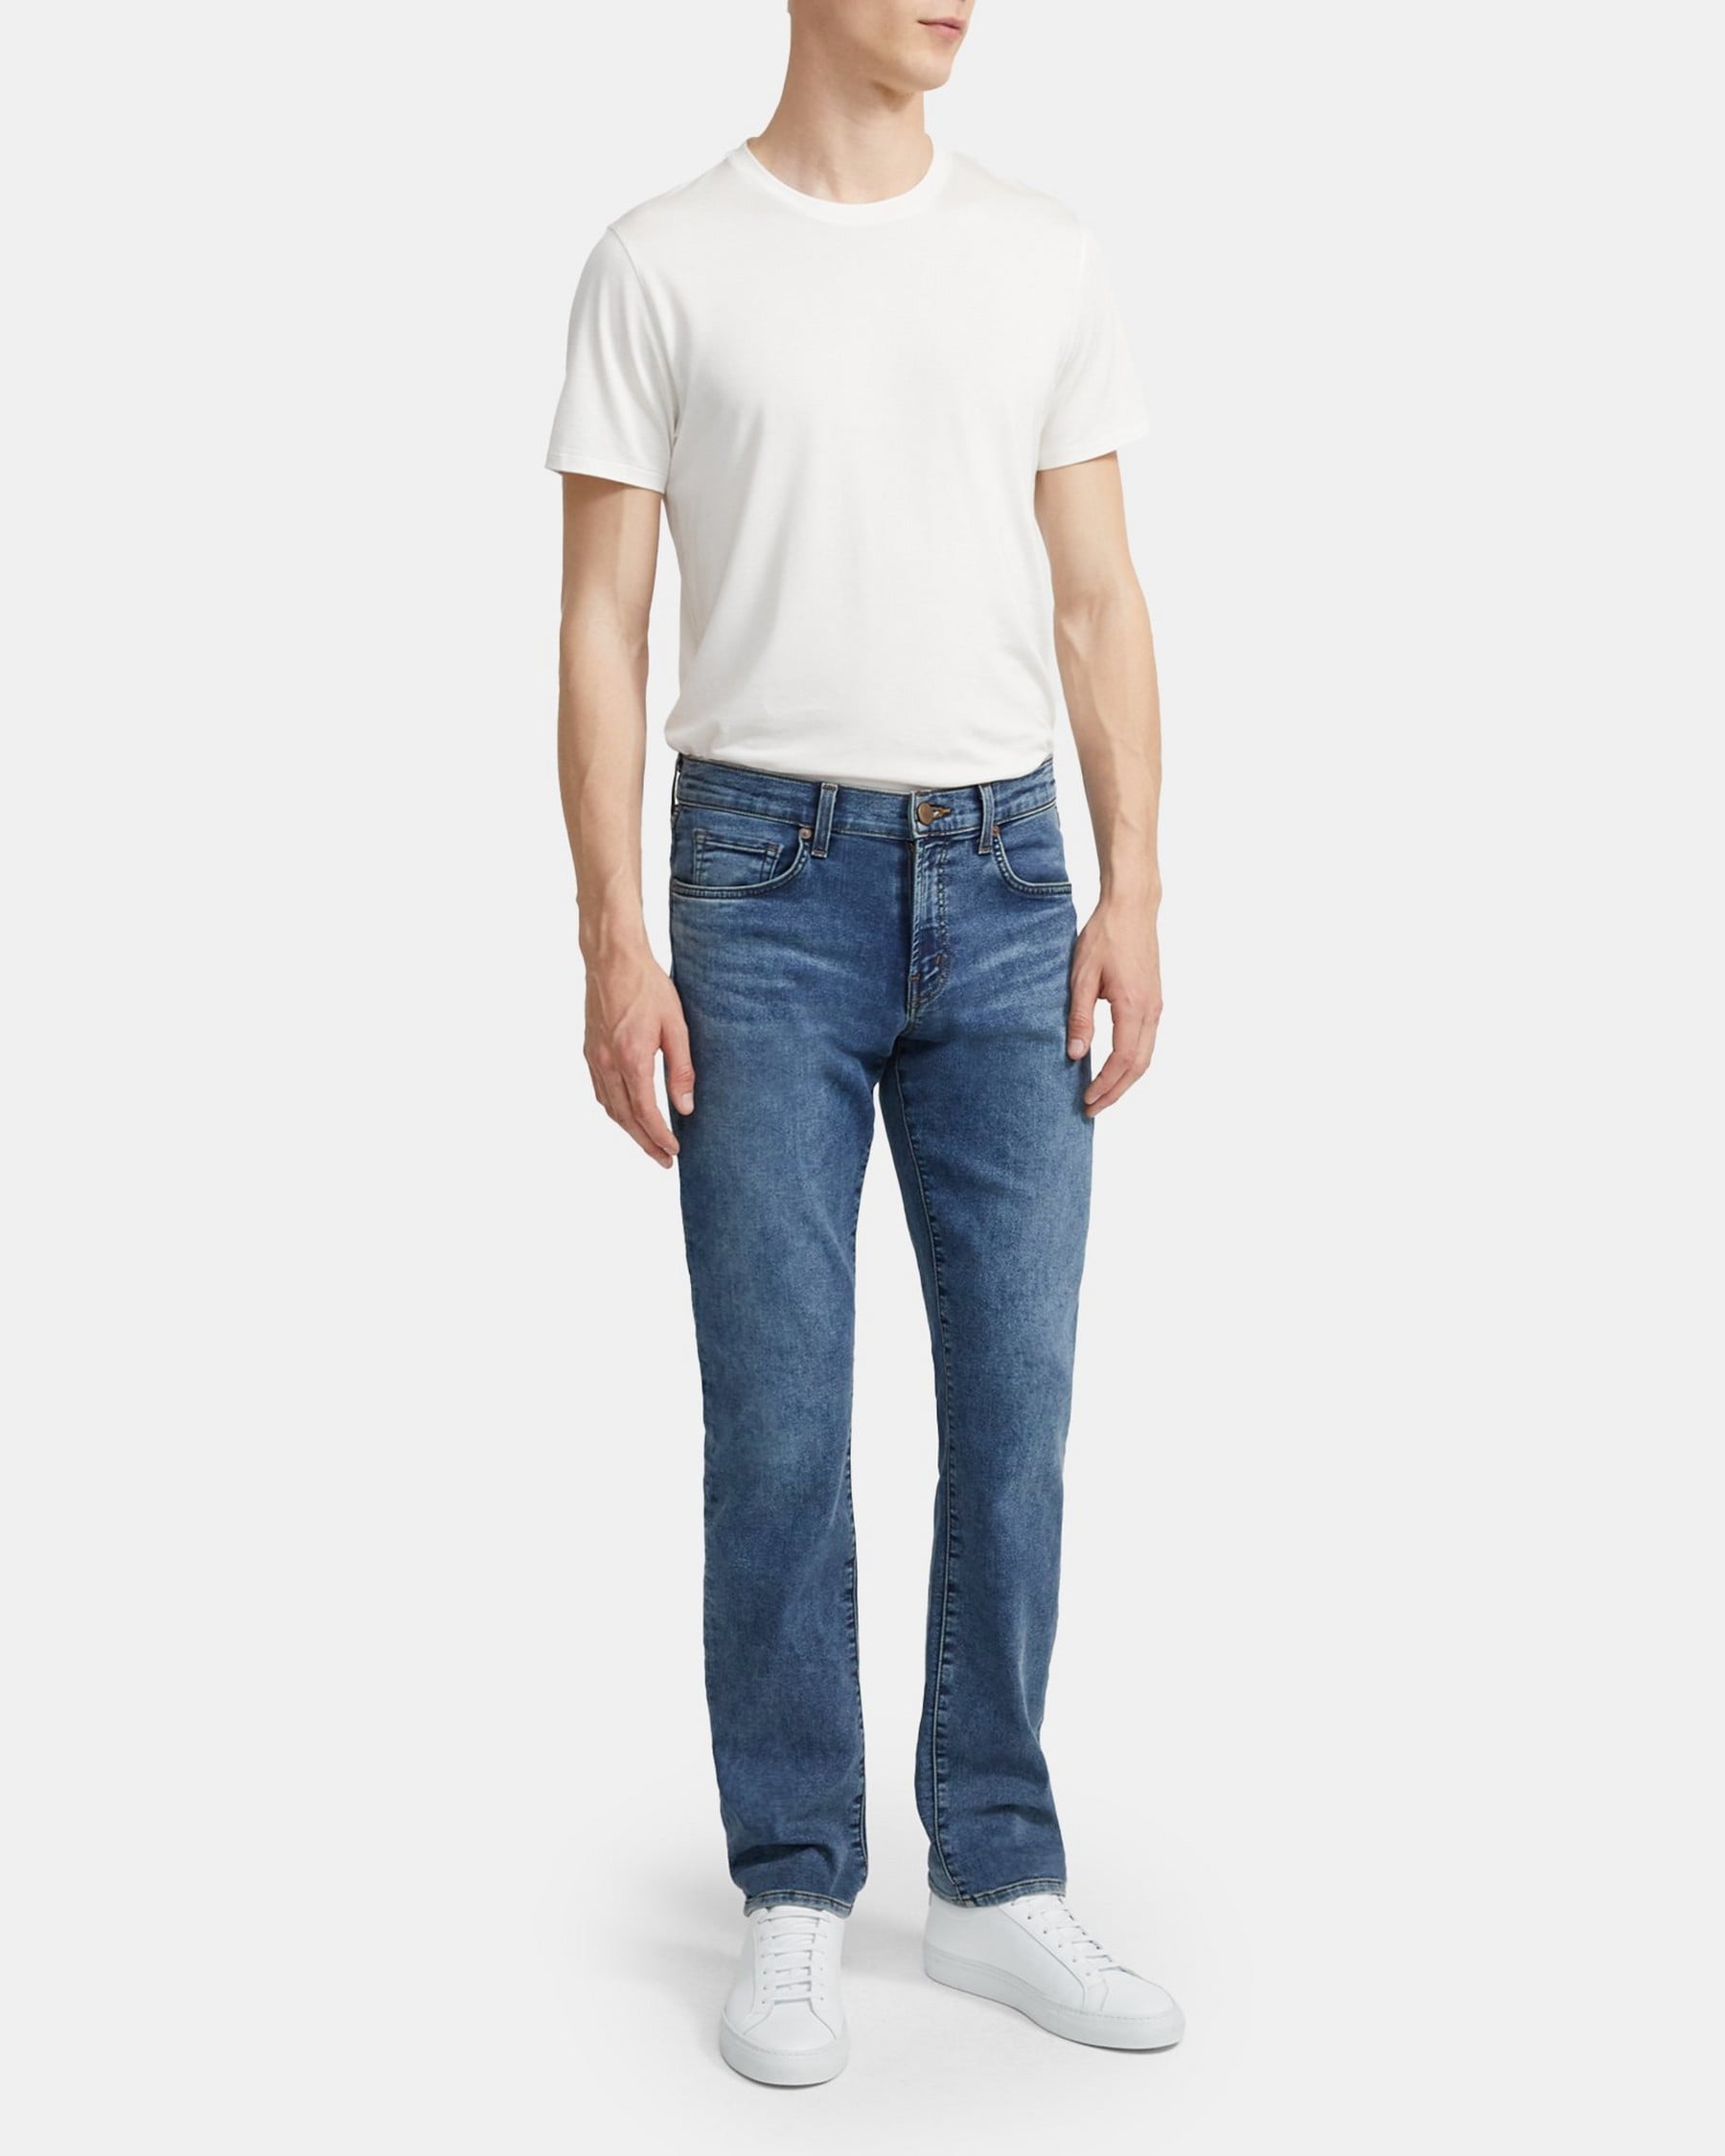 Theory J Brand Kane Straight Fit Jean in French Terry